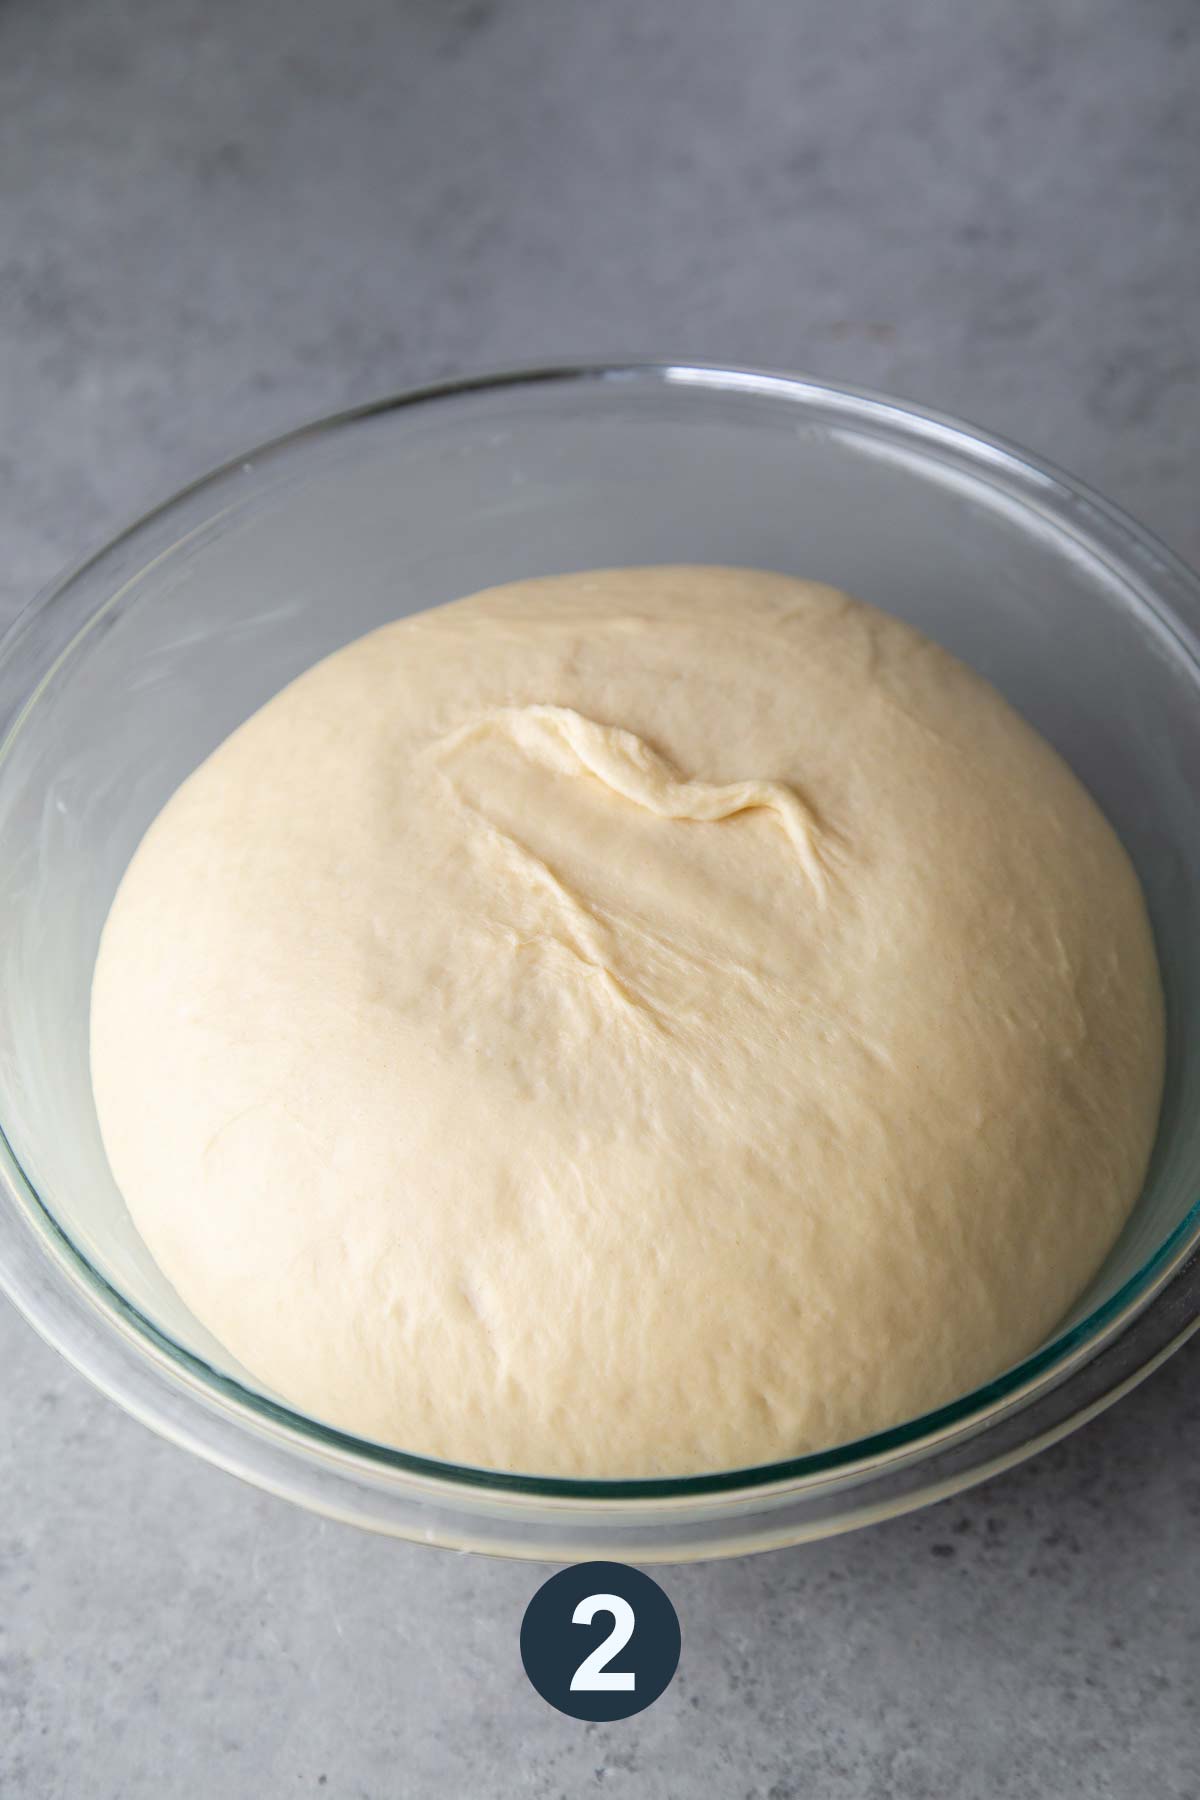 proofed cinnamon roll yeast dough in bowl.